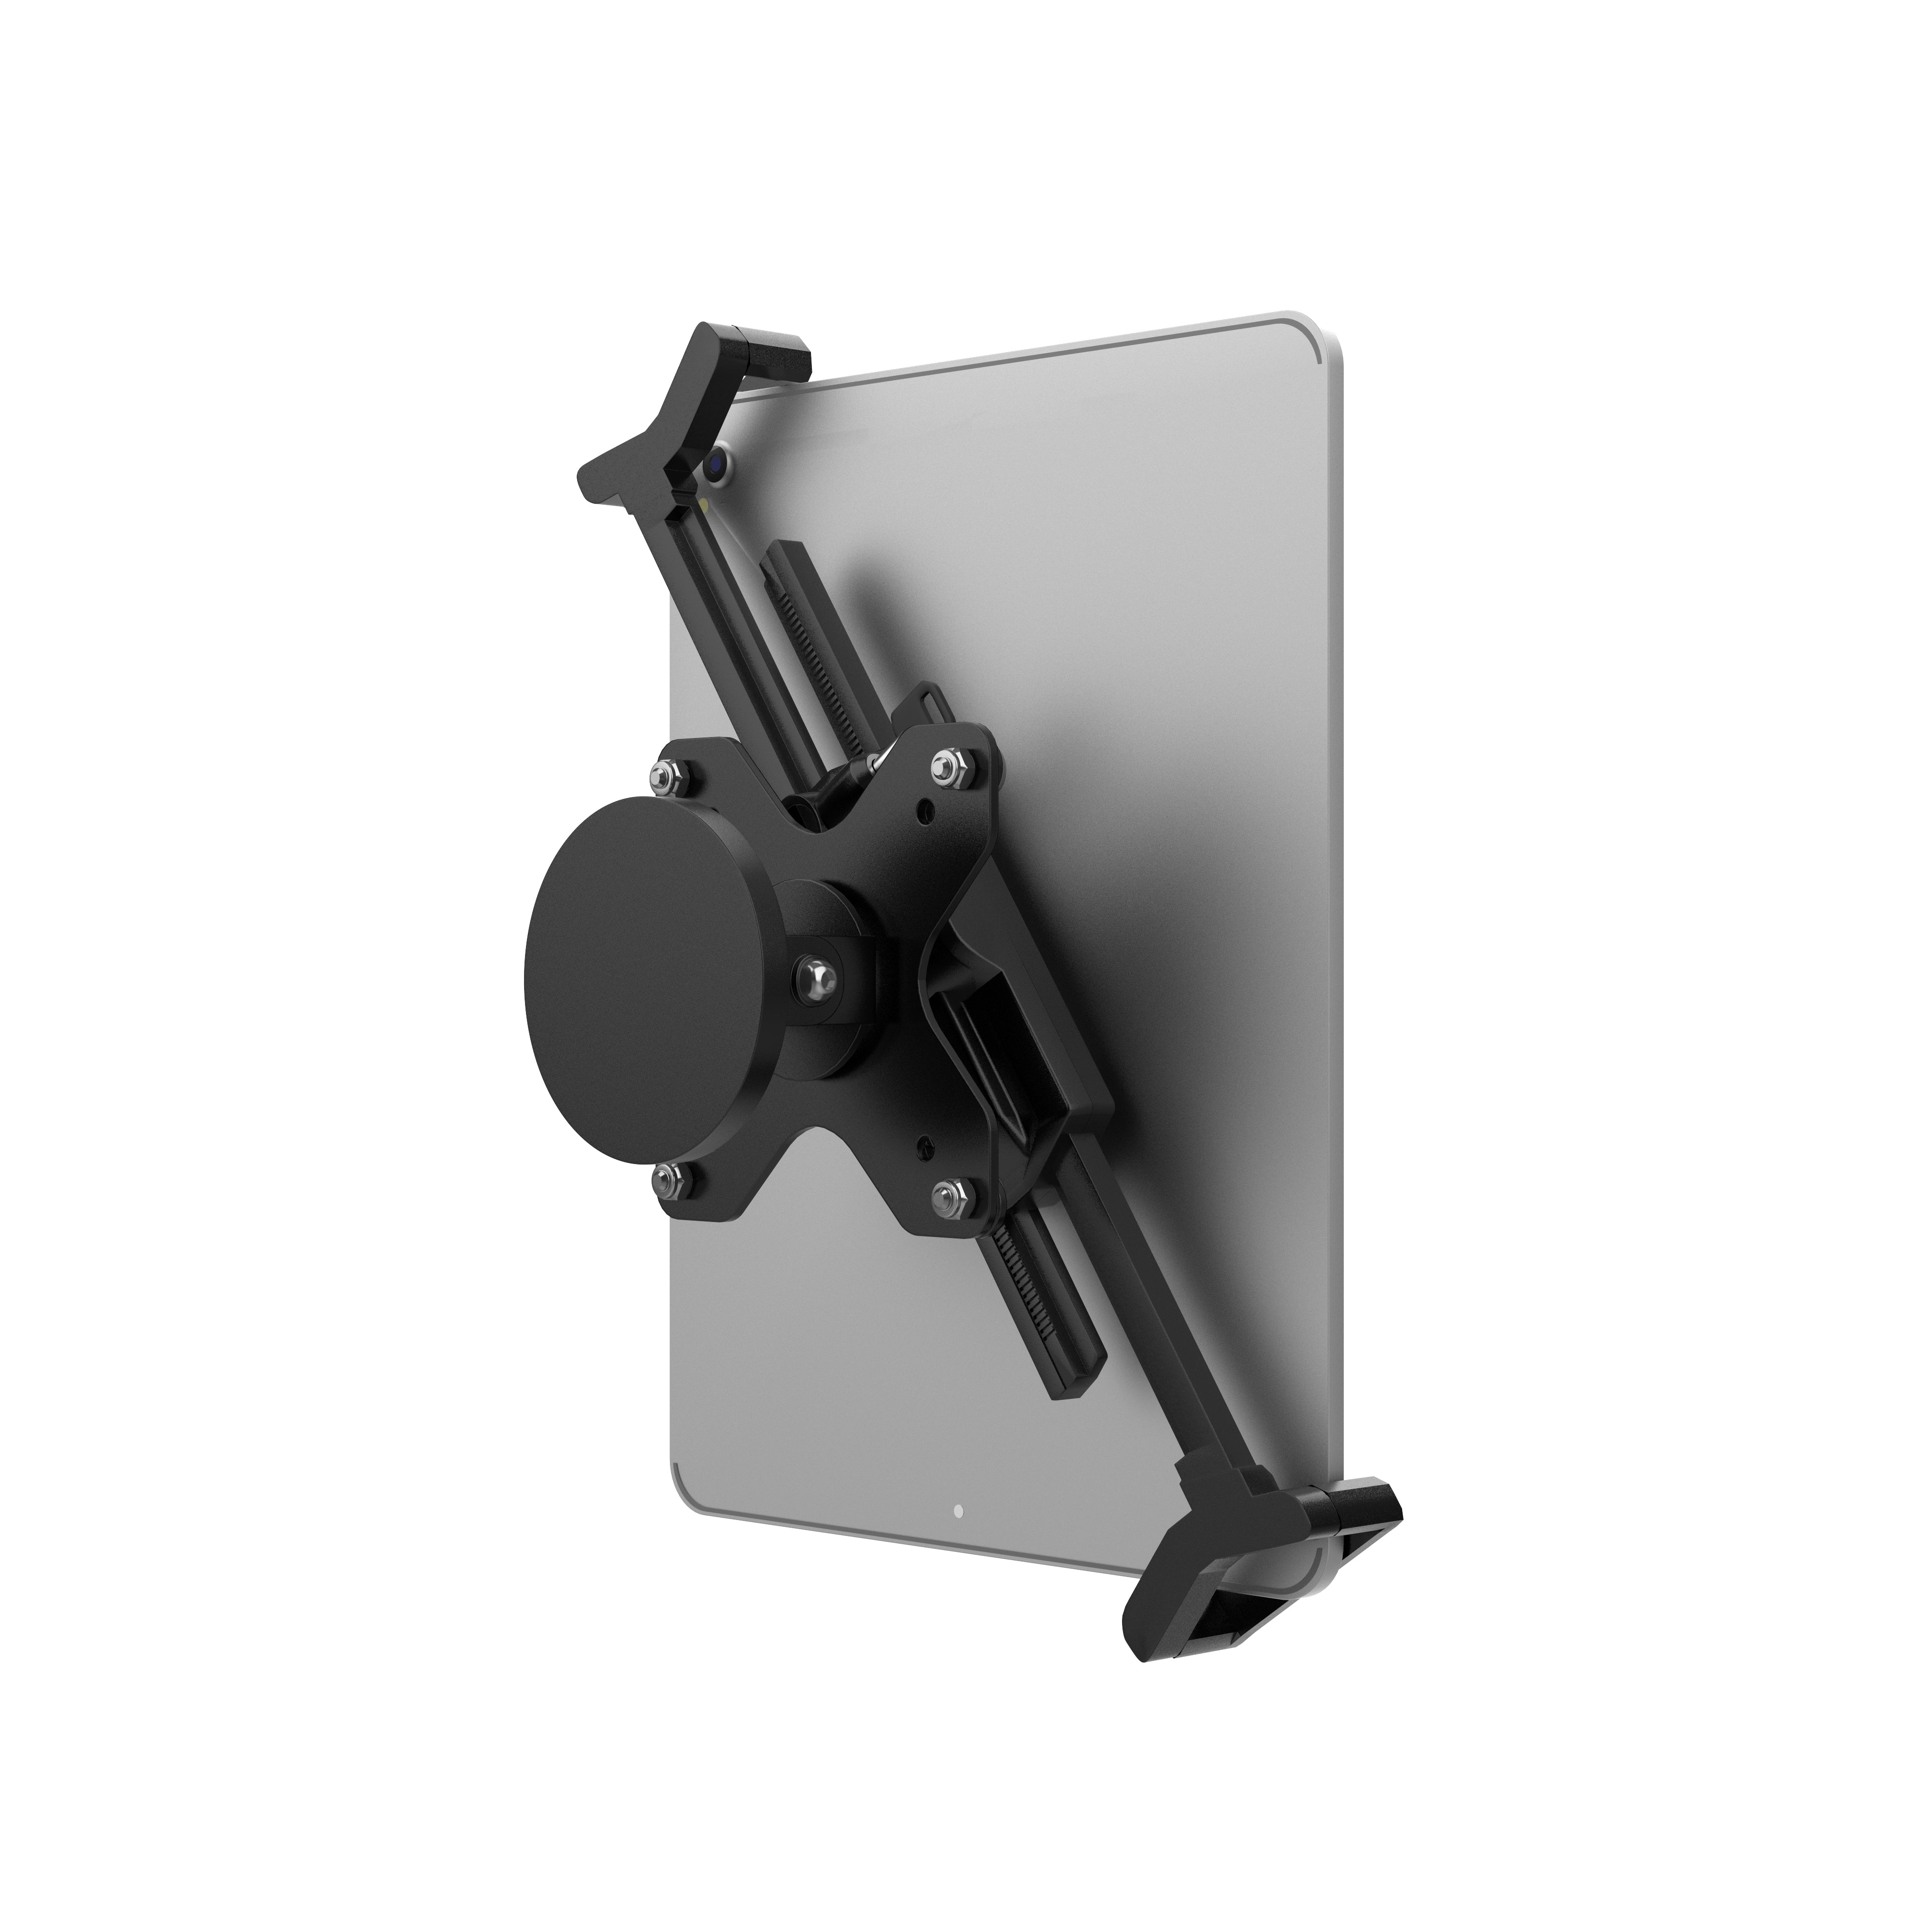 Heavy-Duty Magnetic Mount with Universal Security Tablet Holder 7-14 inch Tablets